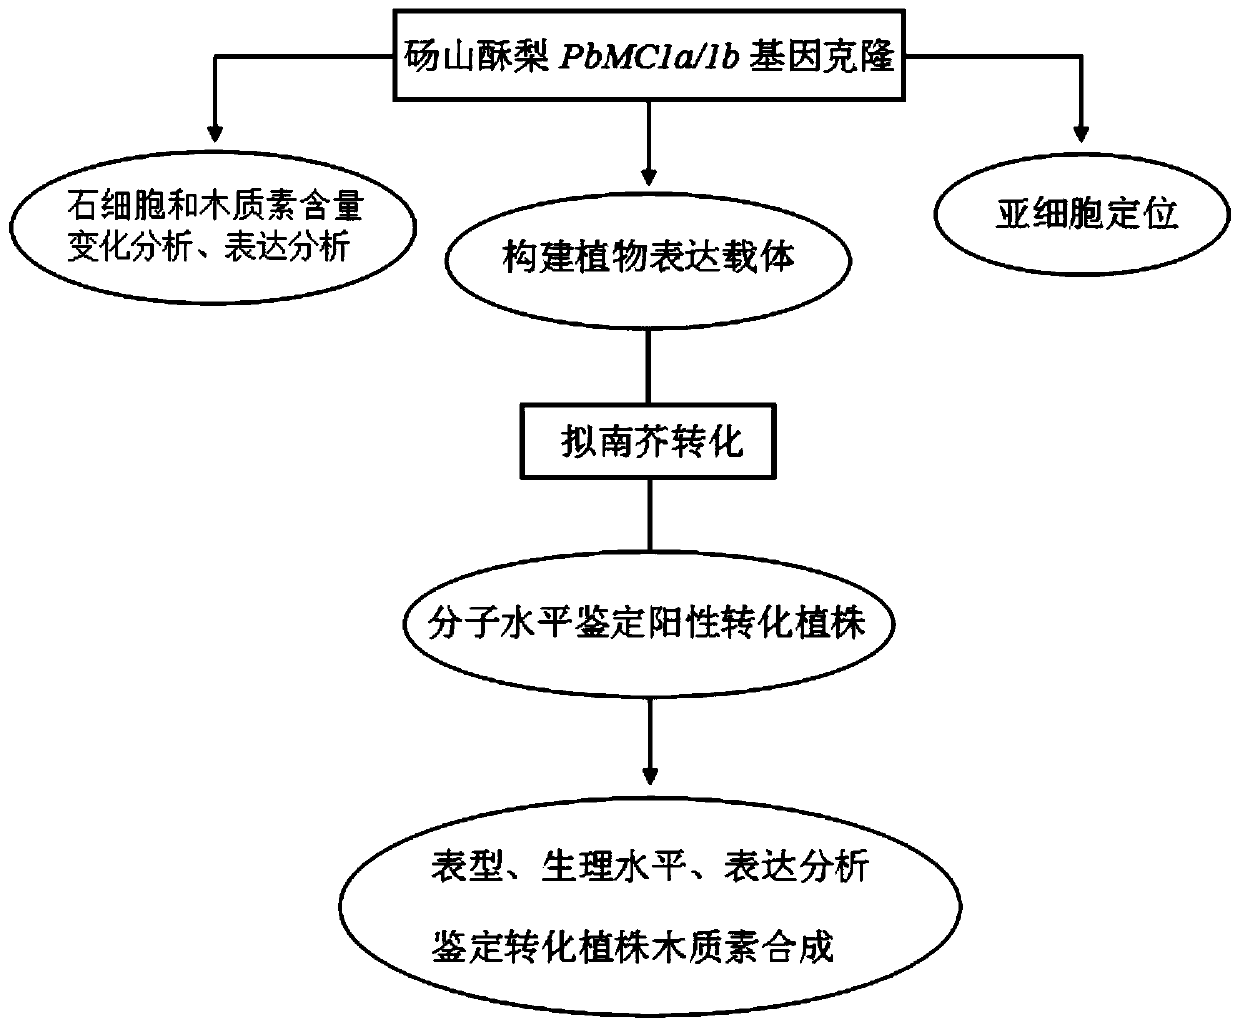 Pear lignin synthesis gene PbMC1a/1b and application of pear lignin synthesis gene PbMC1a/1b in genetic improvement of fruit quality